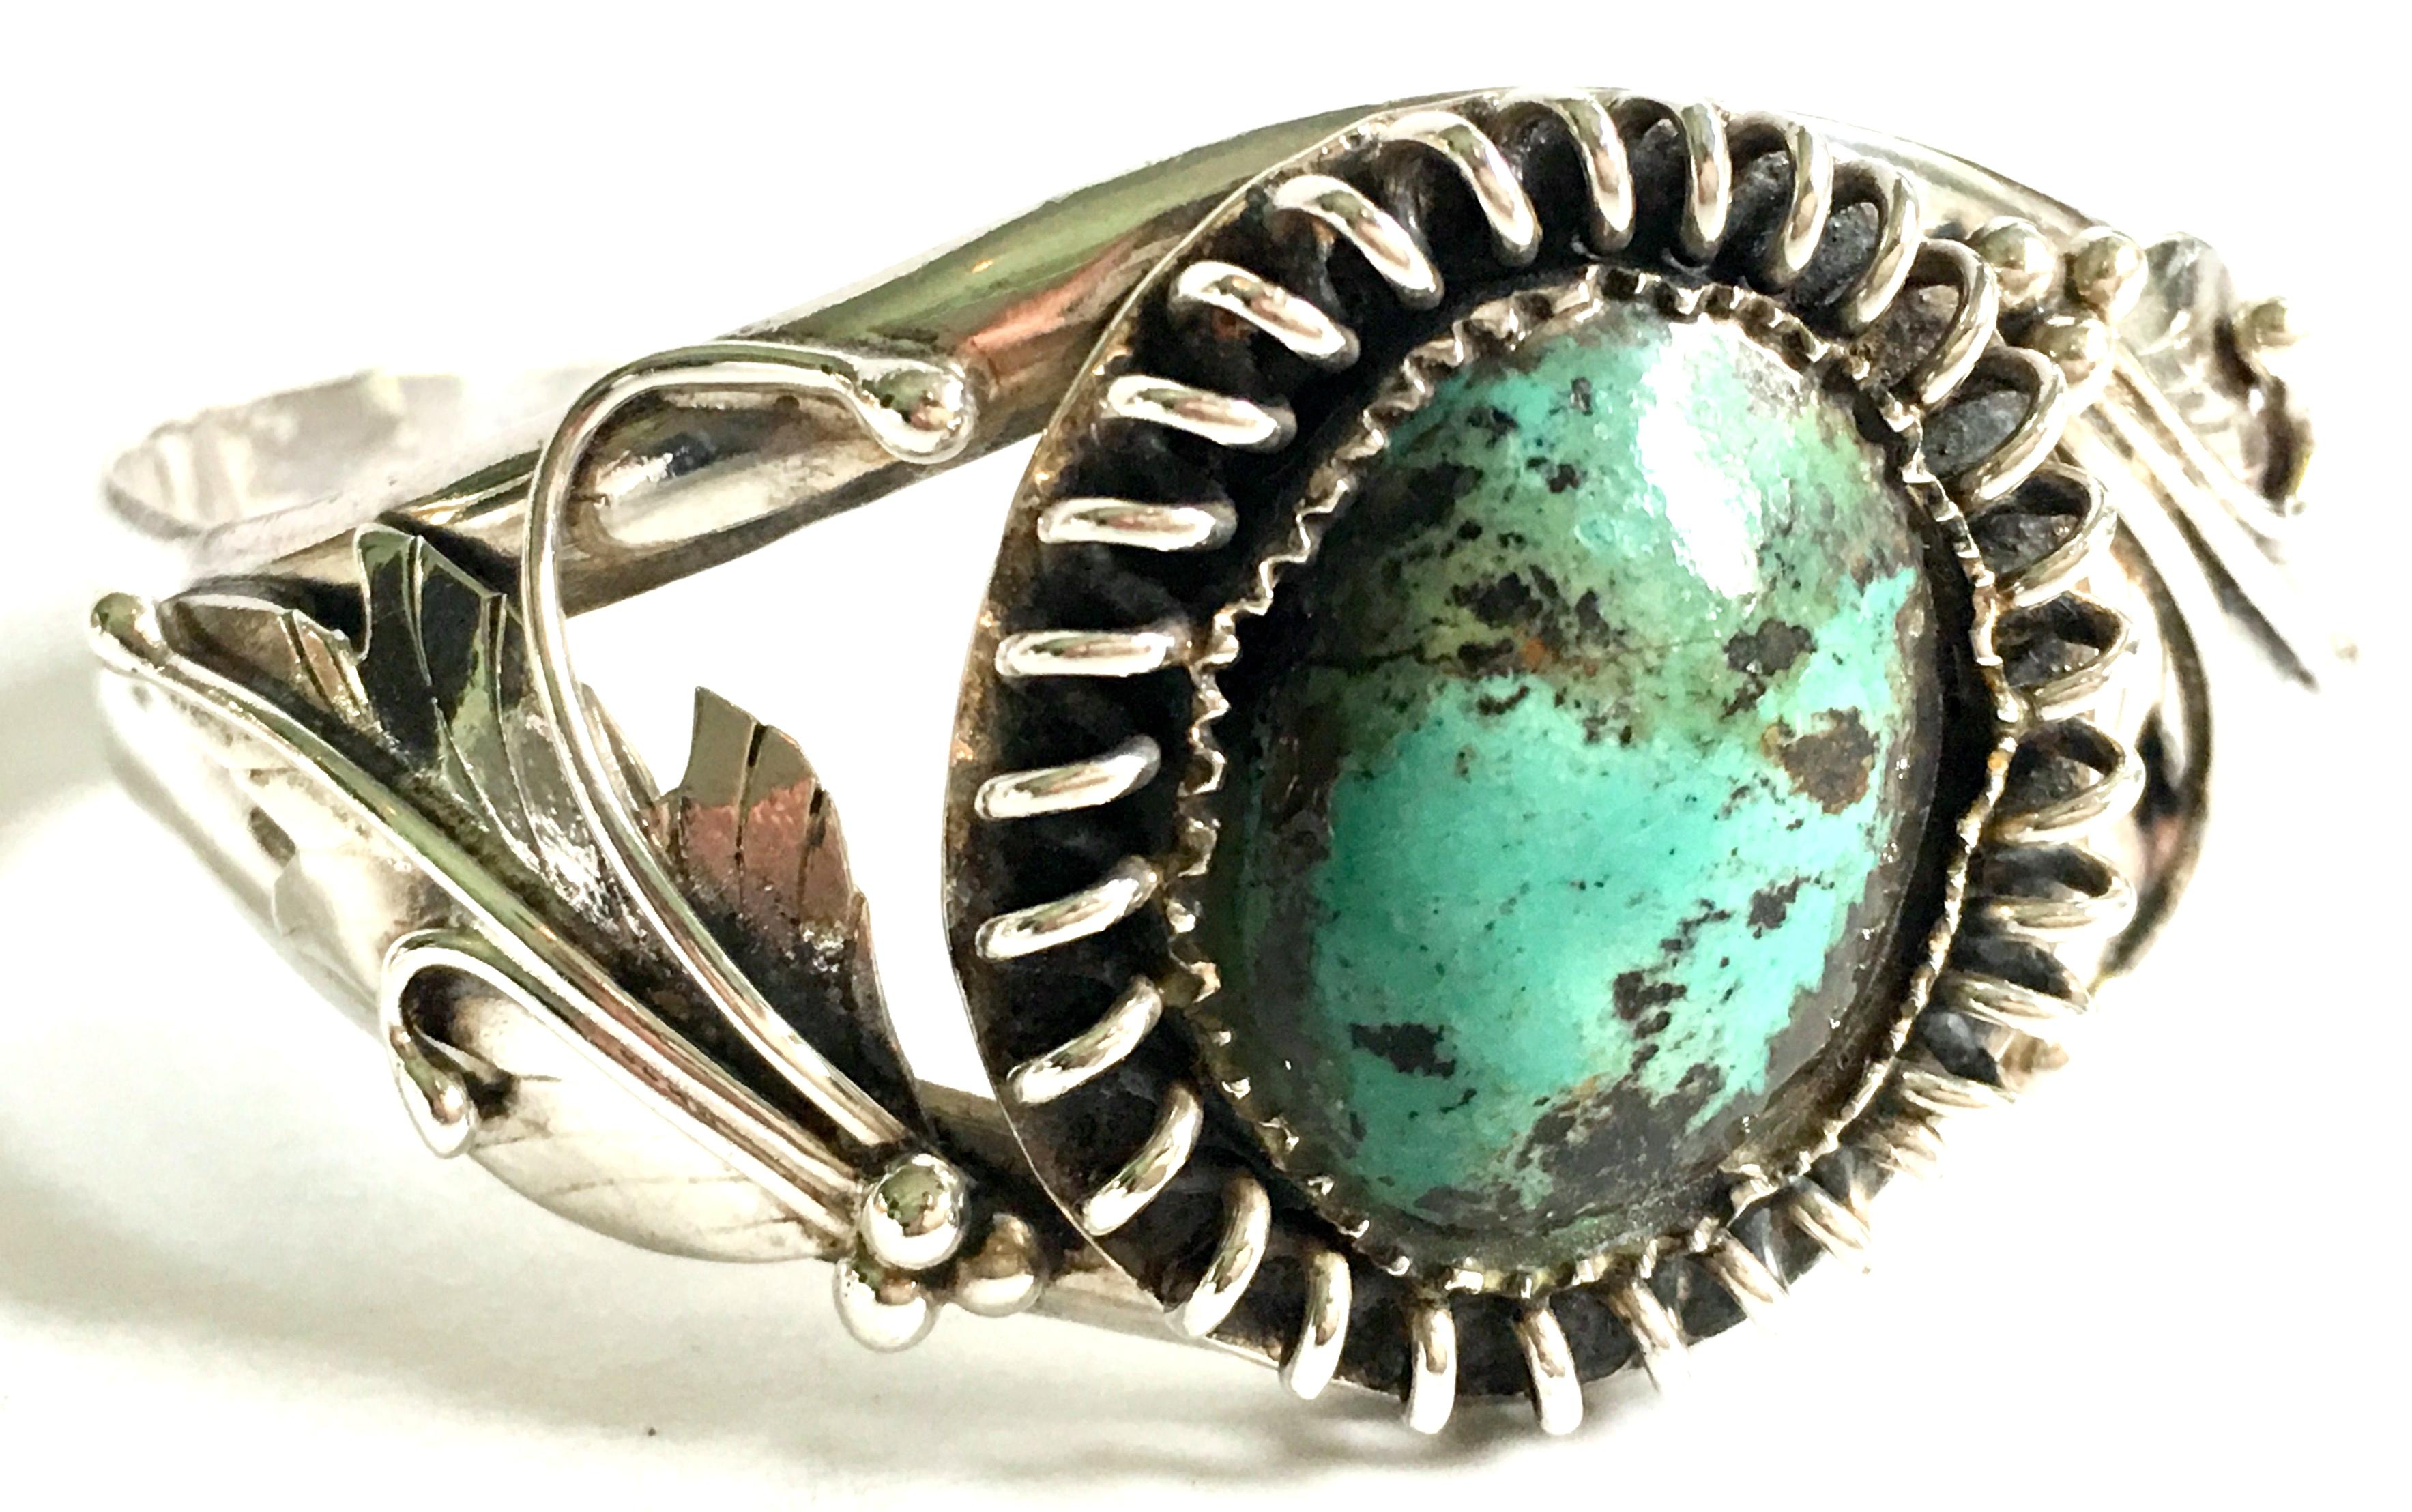 Mid-20th Century Navajo 925 Sterling Silver & Turquoise Cuff Bracelet. This unique and one of a kind piece features a central asymmetrically bezel set central stone surrounded by dimensional sterling coil open work detail. The sterling bracelet is